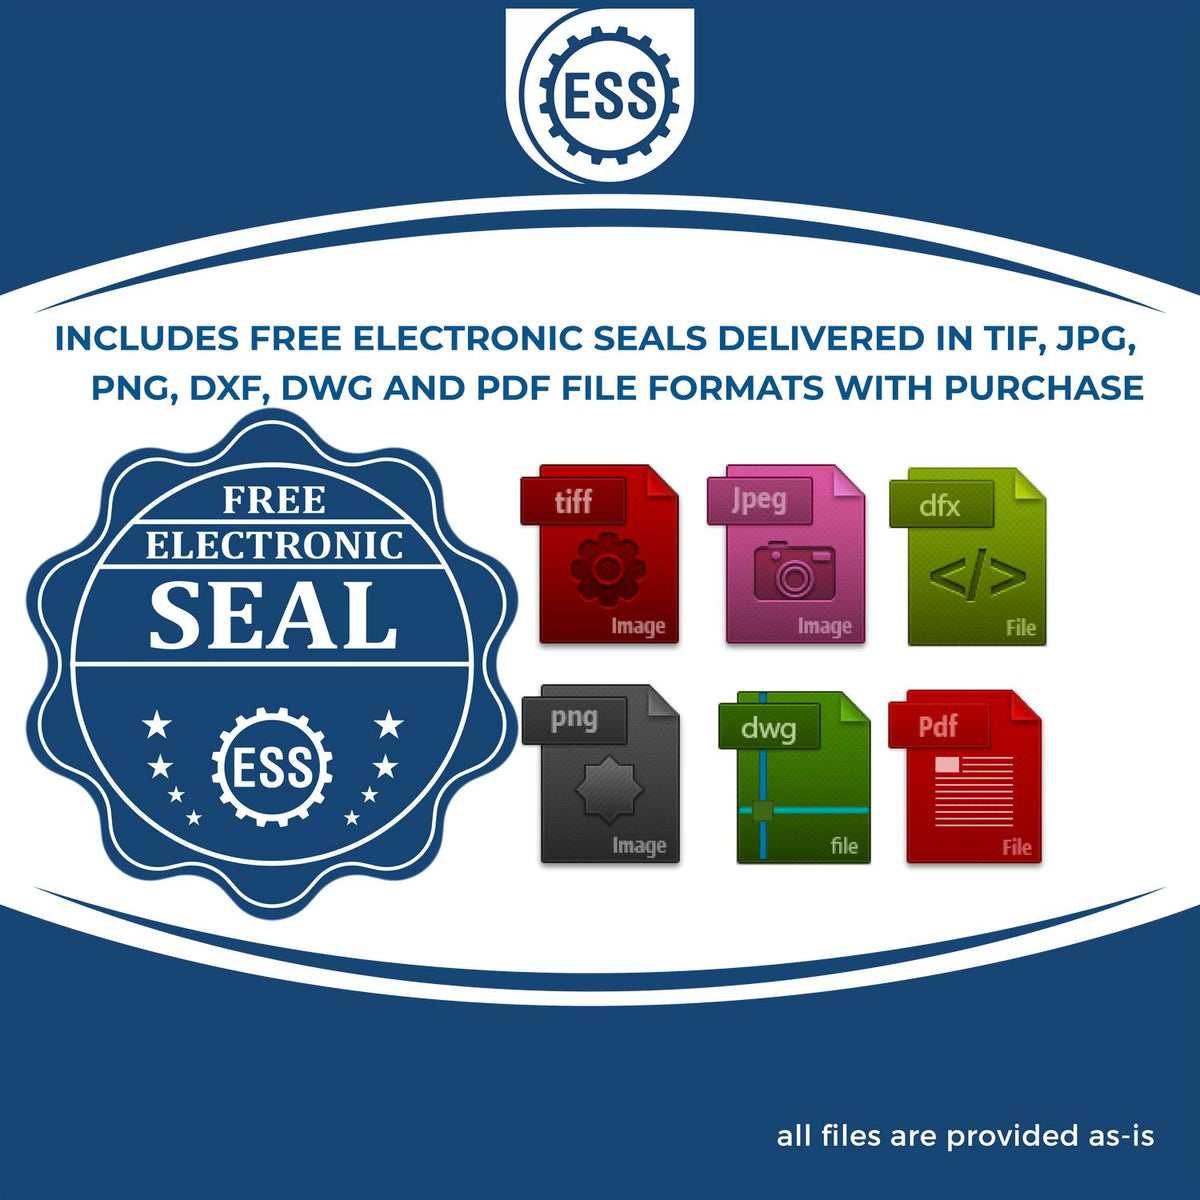 An infographic for the free electronic seal for the Gift North Carolina Landscape Architect Seal illustrating the different file type icons such as DXF, DWG, TIF, JPG and PNG.